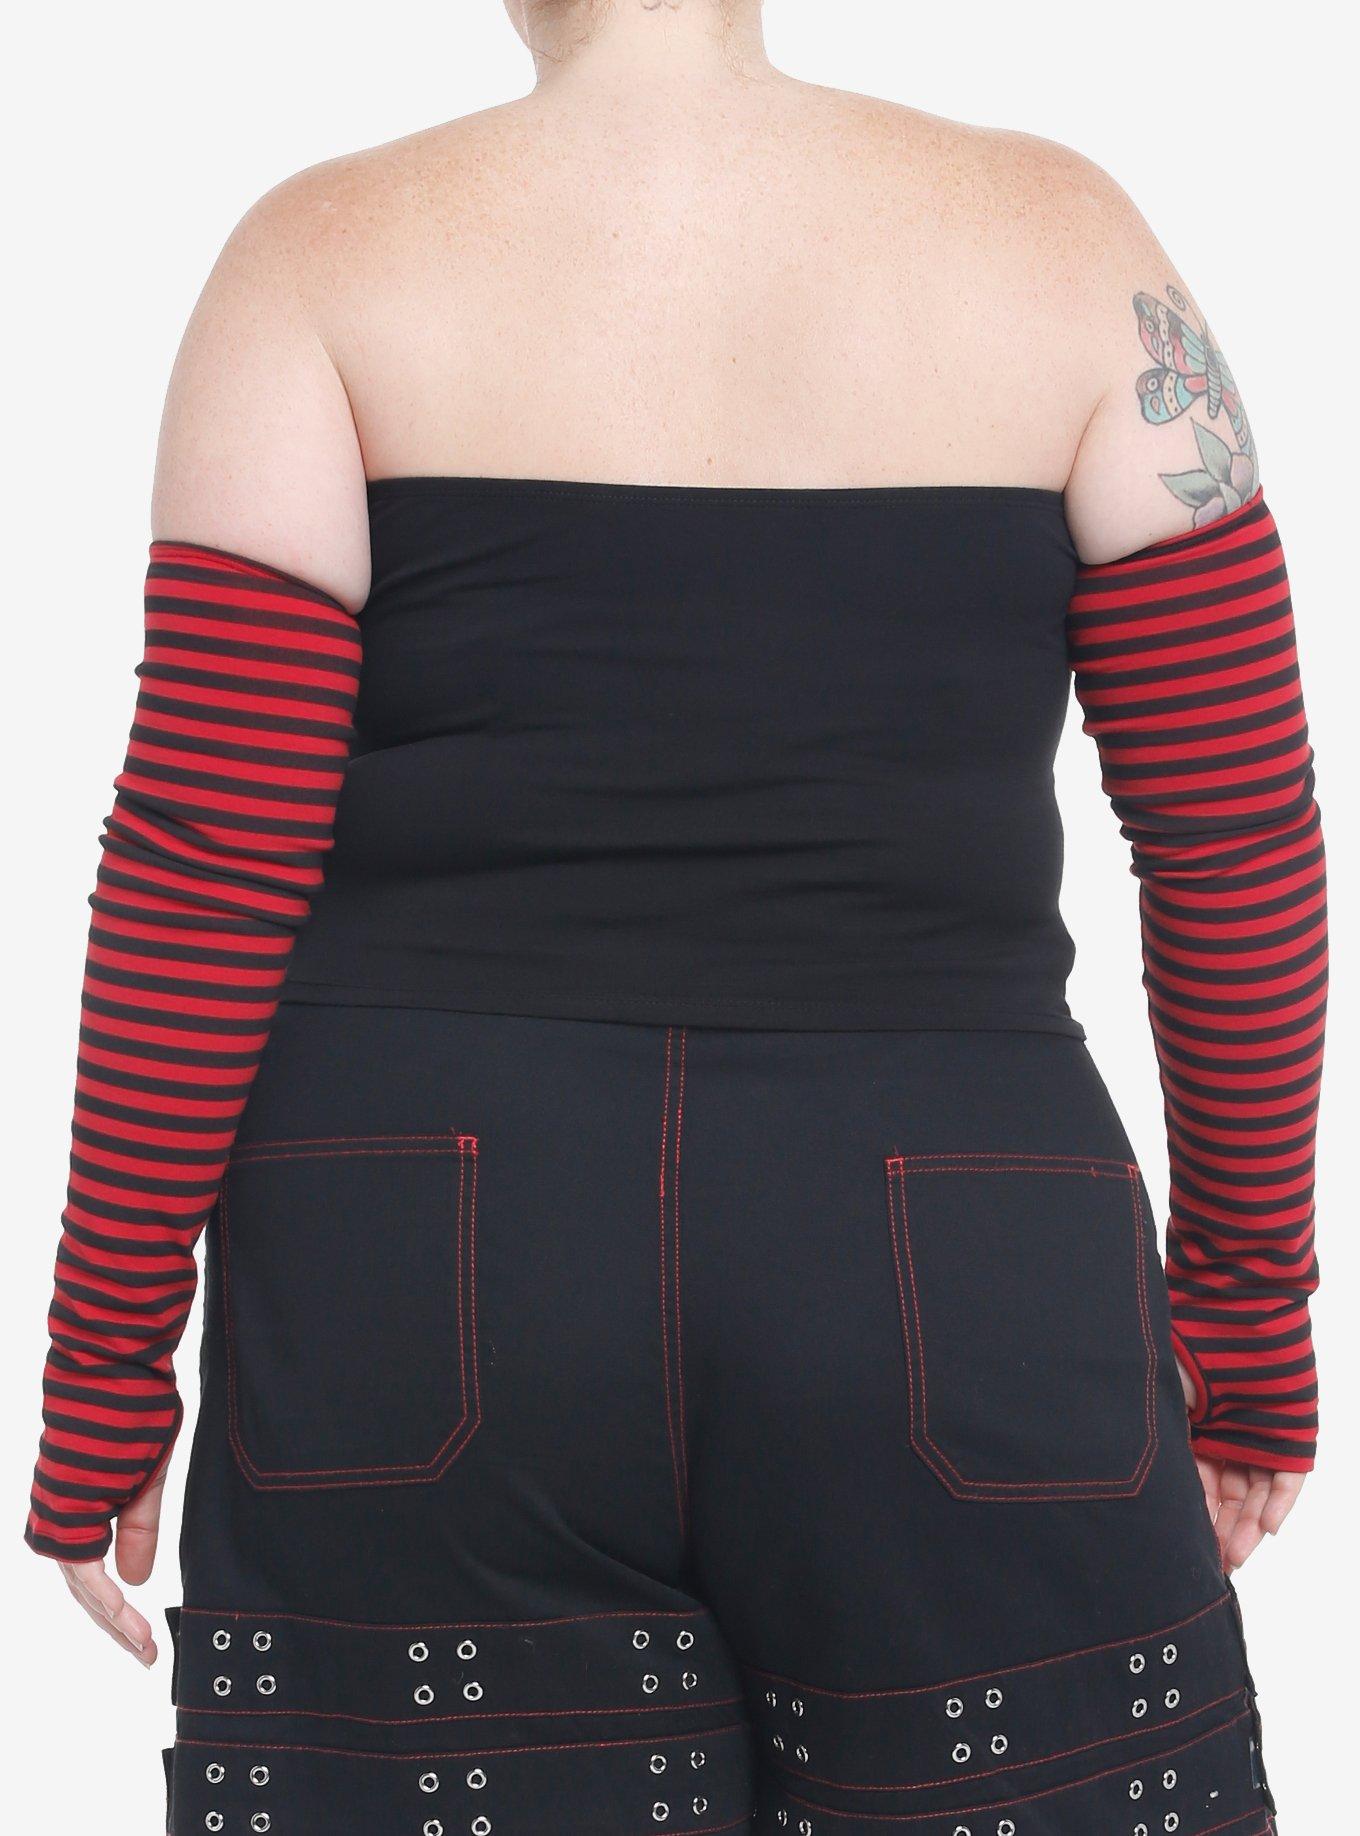 Red & Black Tube Top With Stripe Arm Warmers Plus Size, STRIPE - RED, alternate